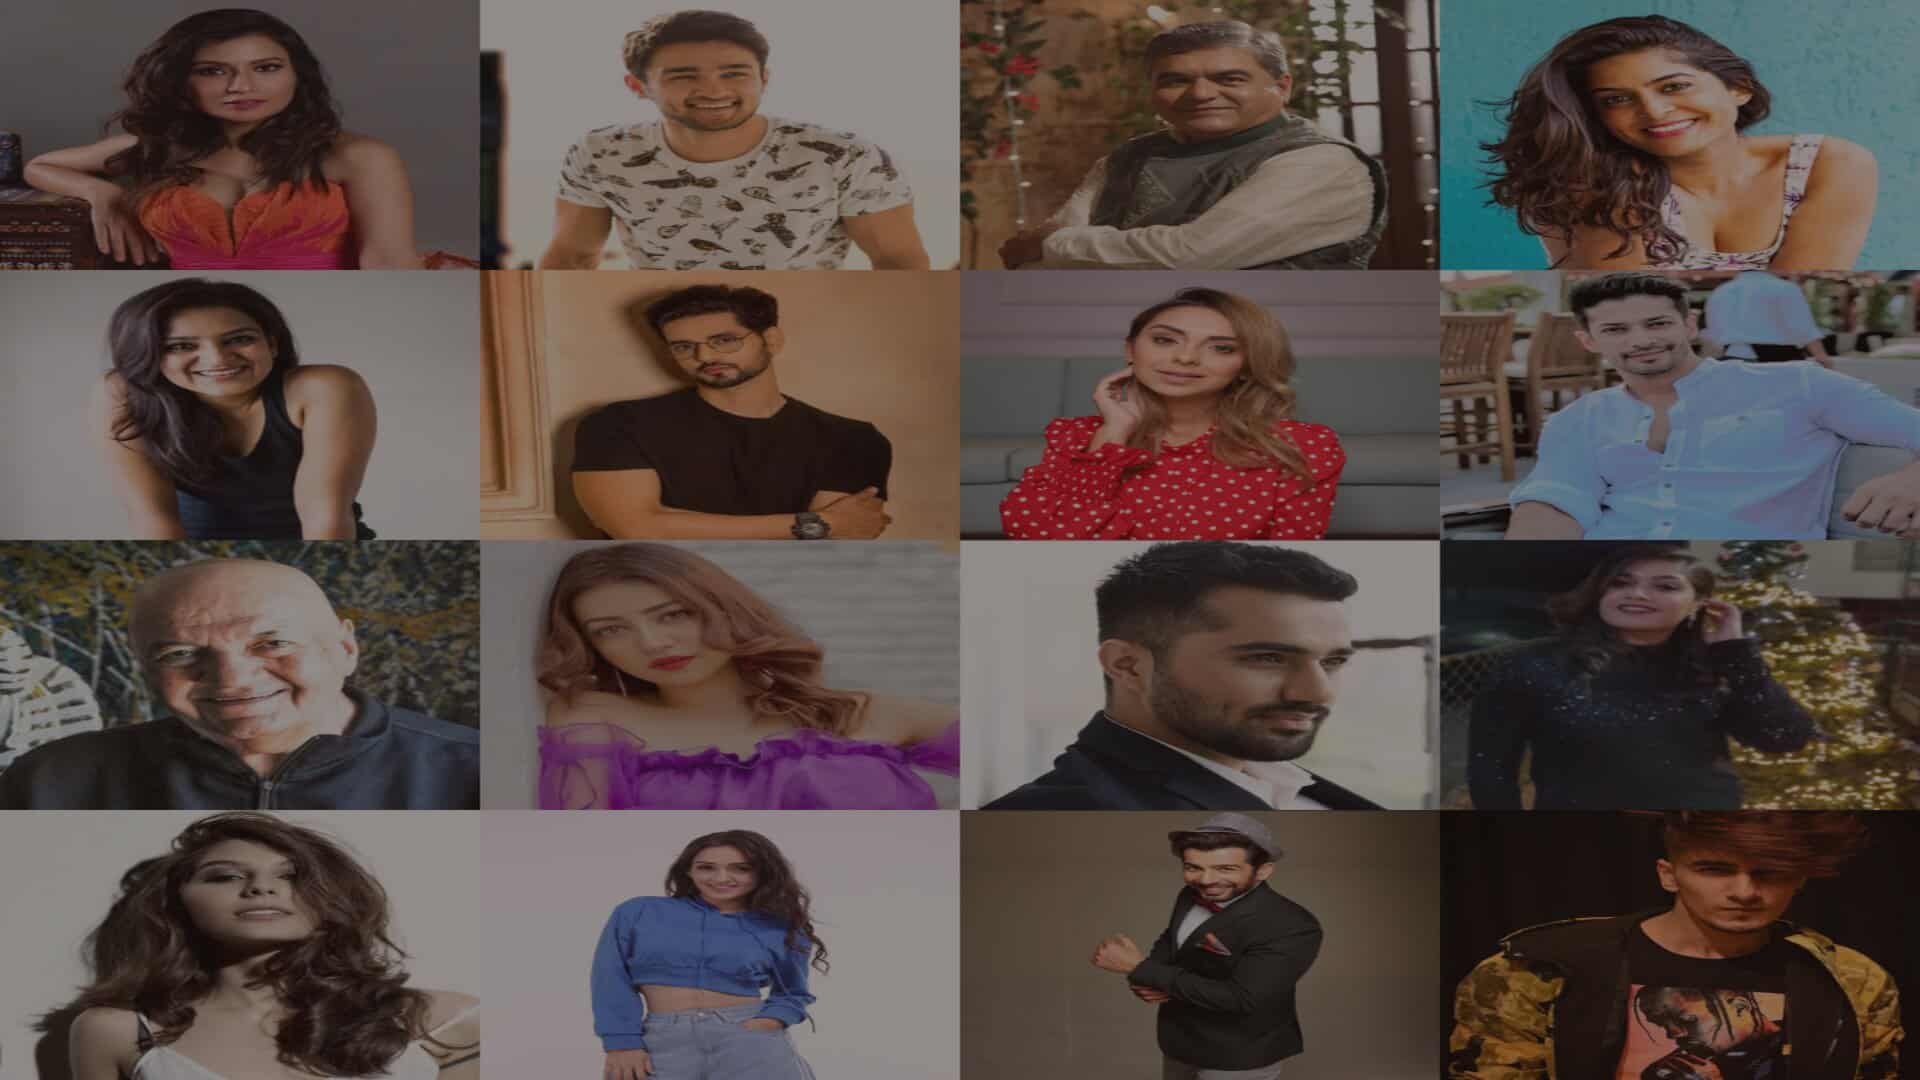 HeyHey! Raises USD 1.5 million, strengthens foothold as leading celebrity video platform in India